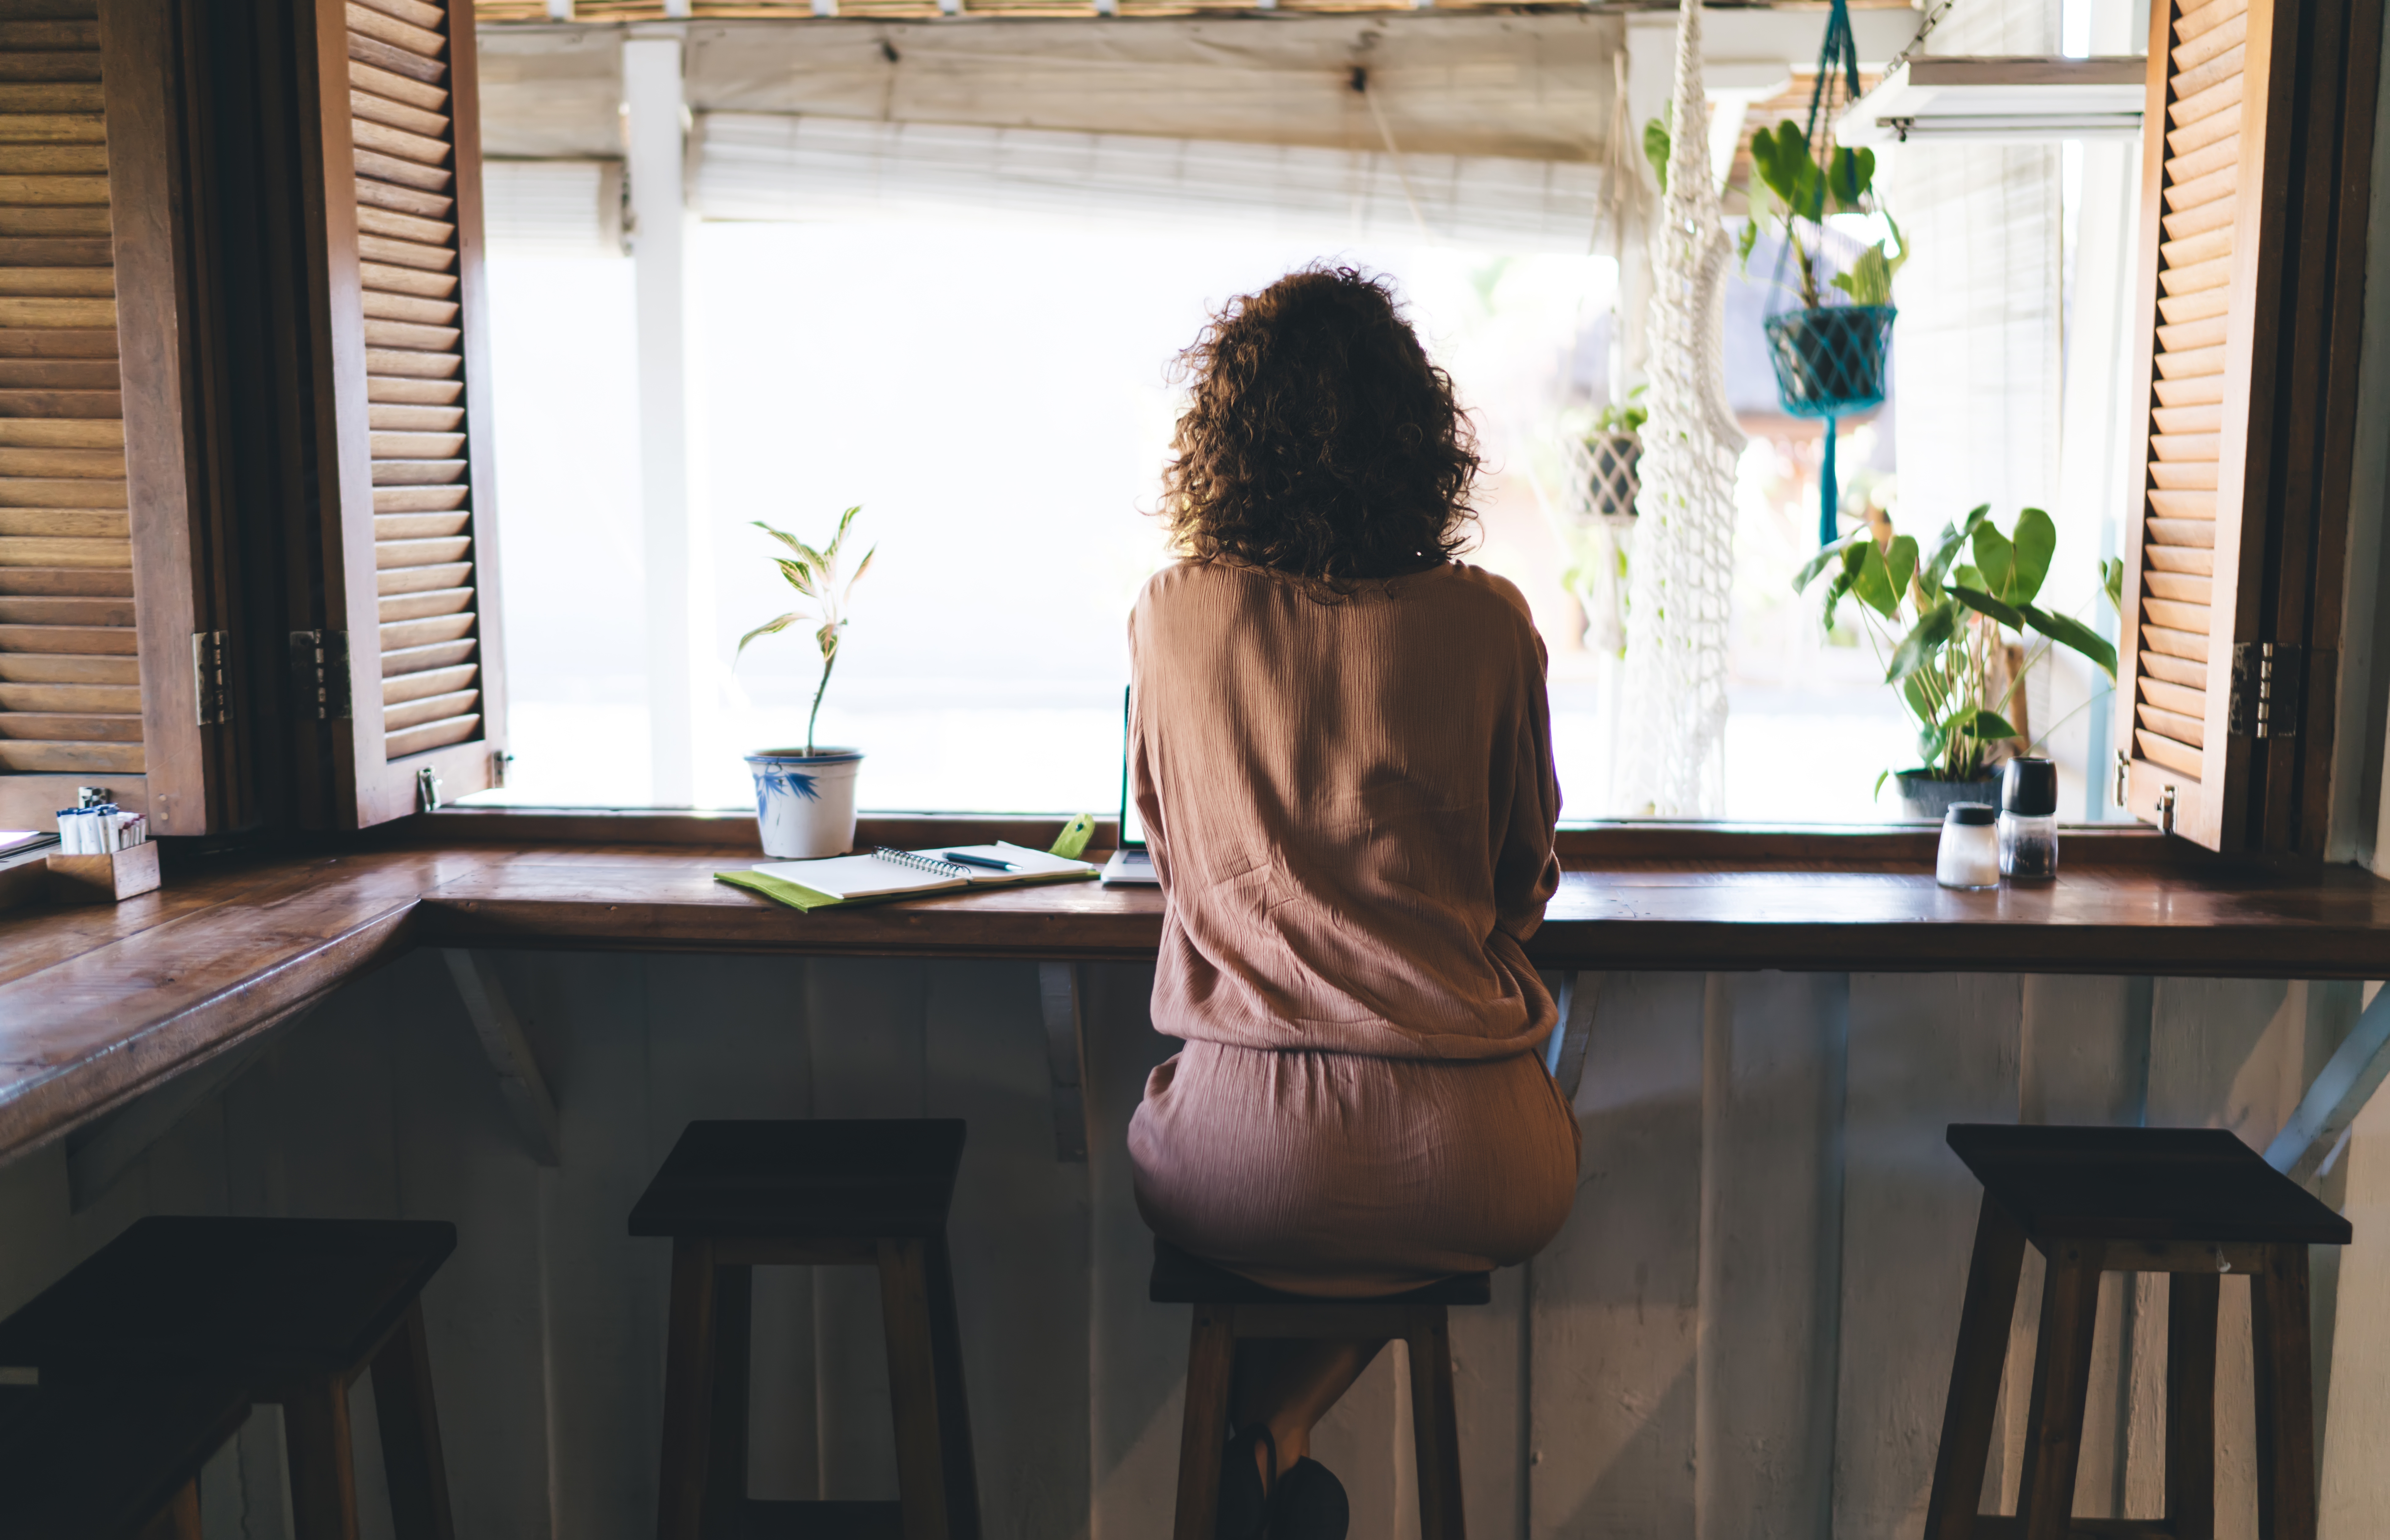 Back view of woman sitting at bar table at cafe. | Source: Shutterstock